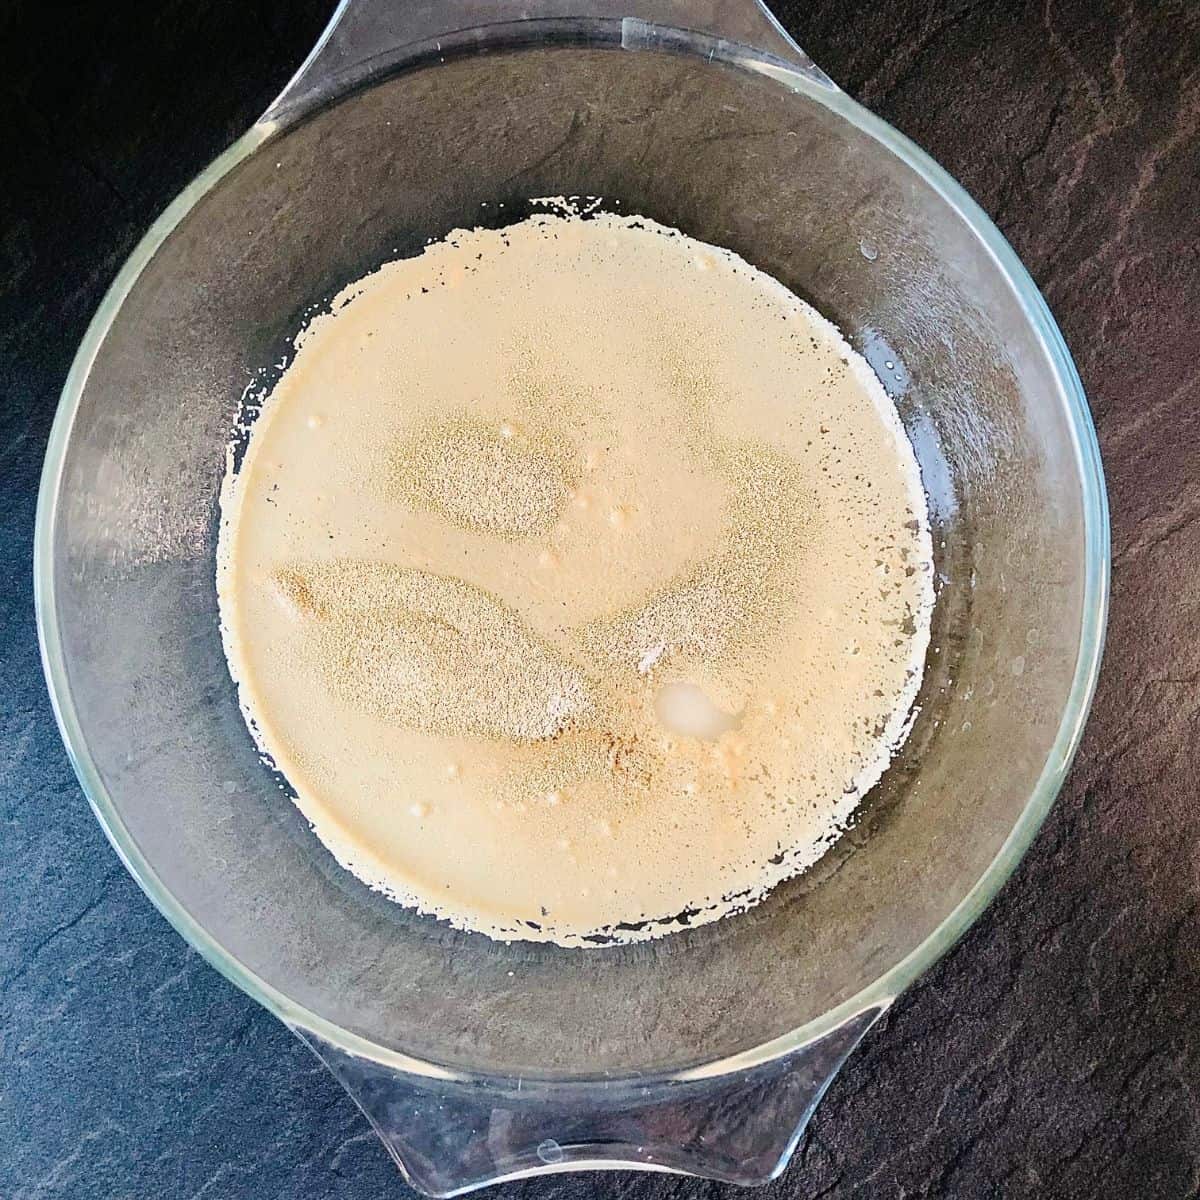 Yeast, castor sugar and water mixed together in a glass bowl